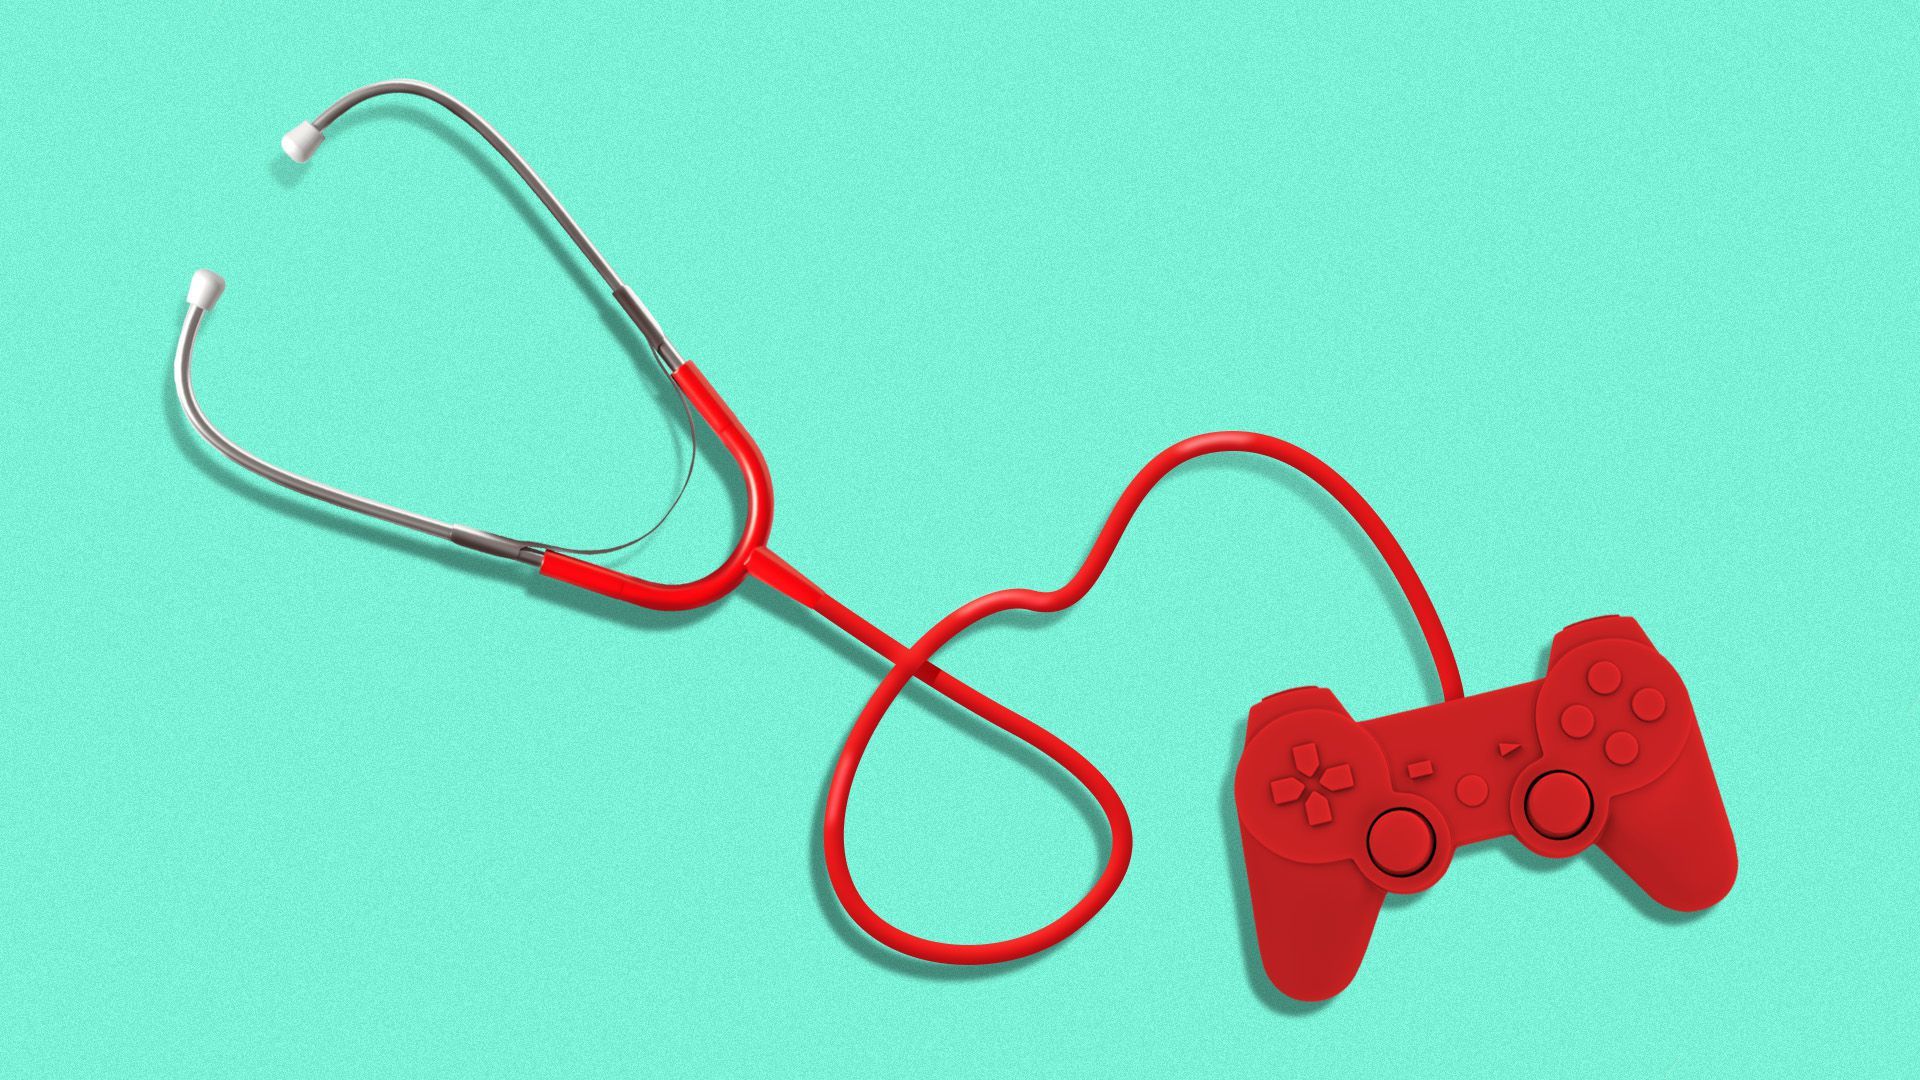 Illustration of a stethoscope with a video game controller at the end